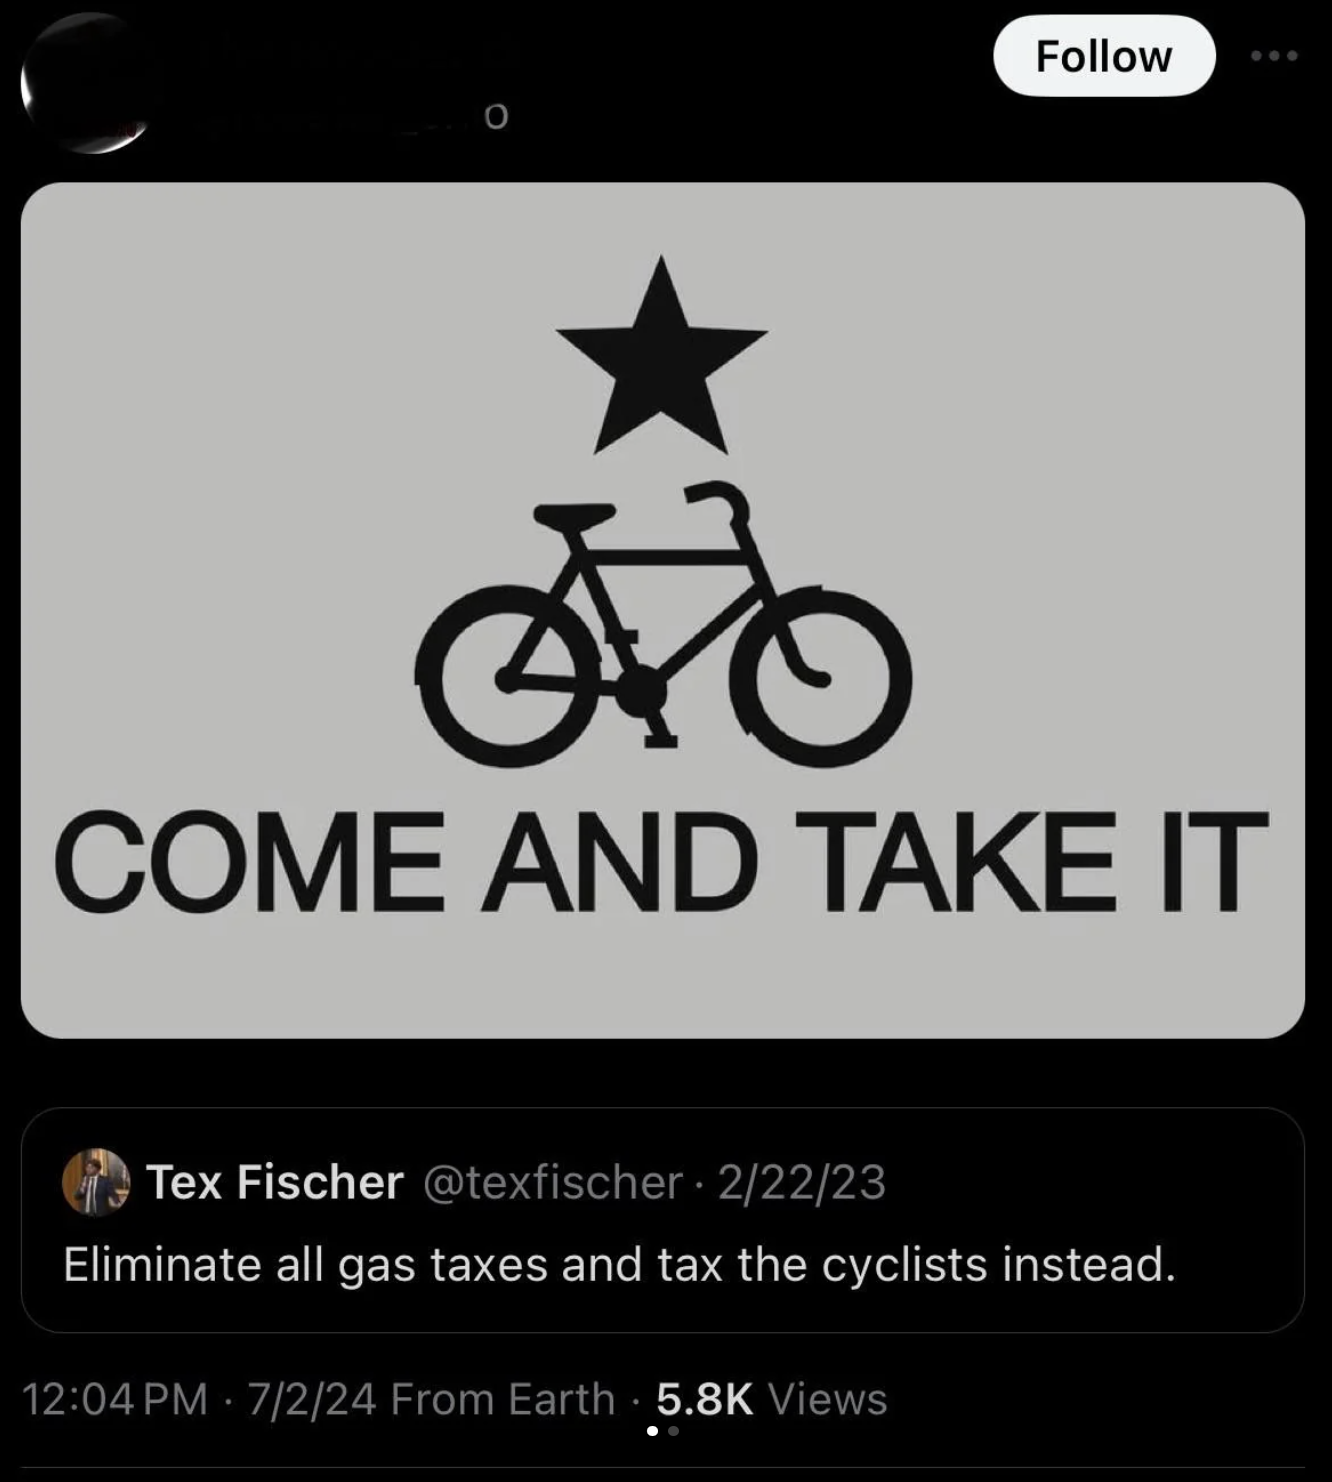 racing bicycle - Come And Take It Tex Fischer 22223 Eliminate all gas taxes and tax the cyclists instead. 7224 From Earth Views